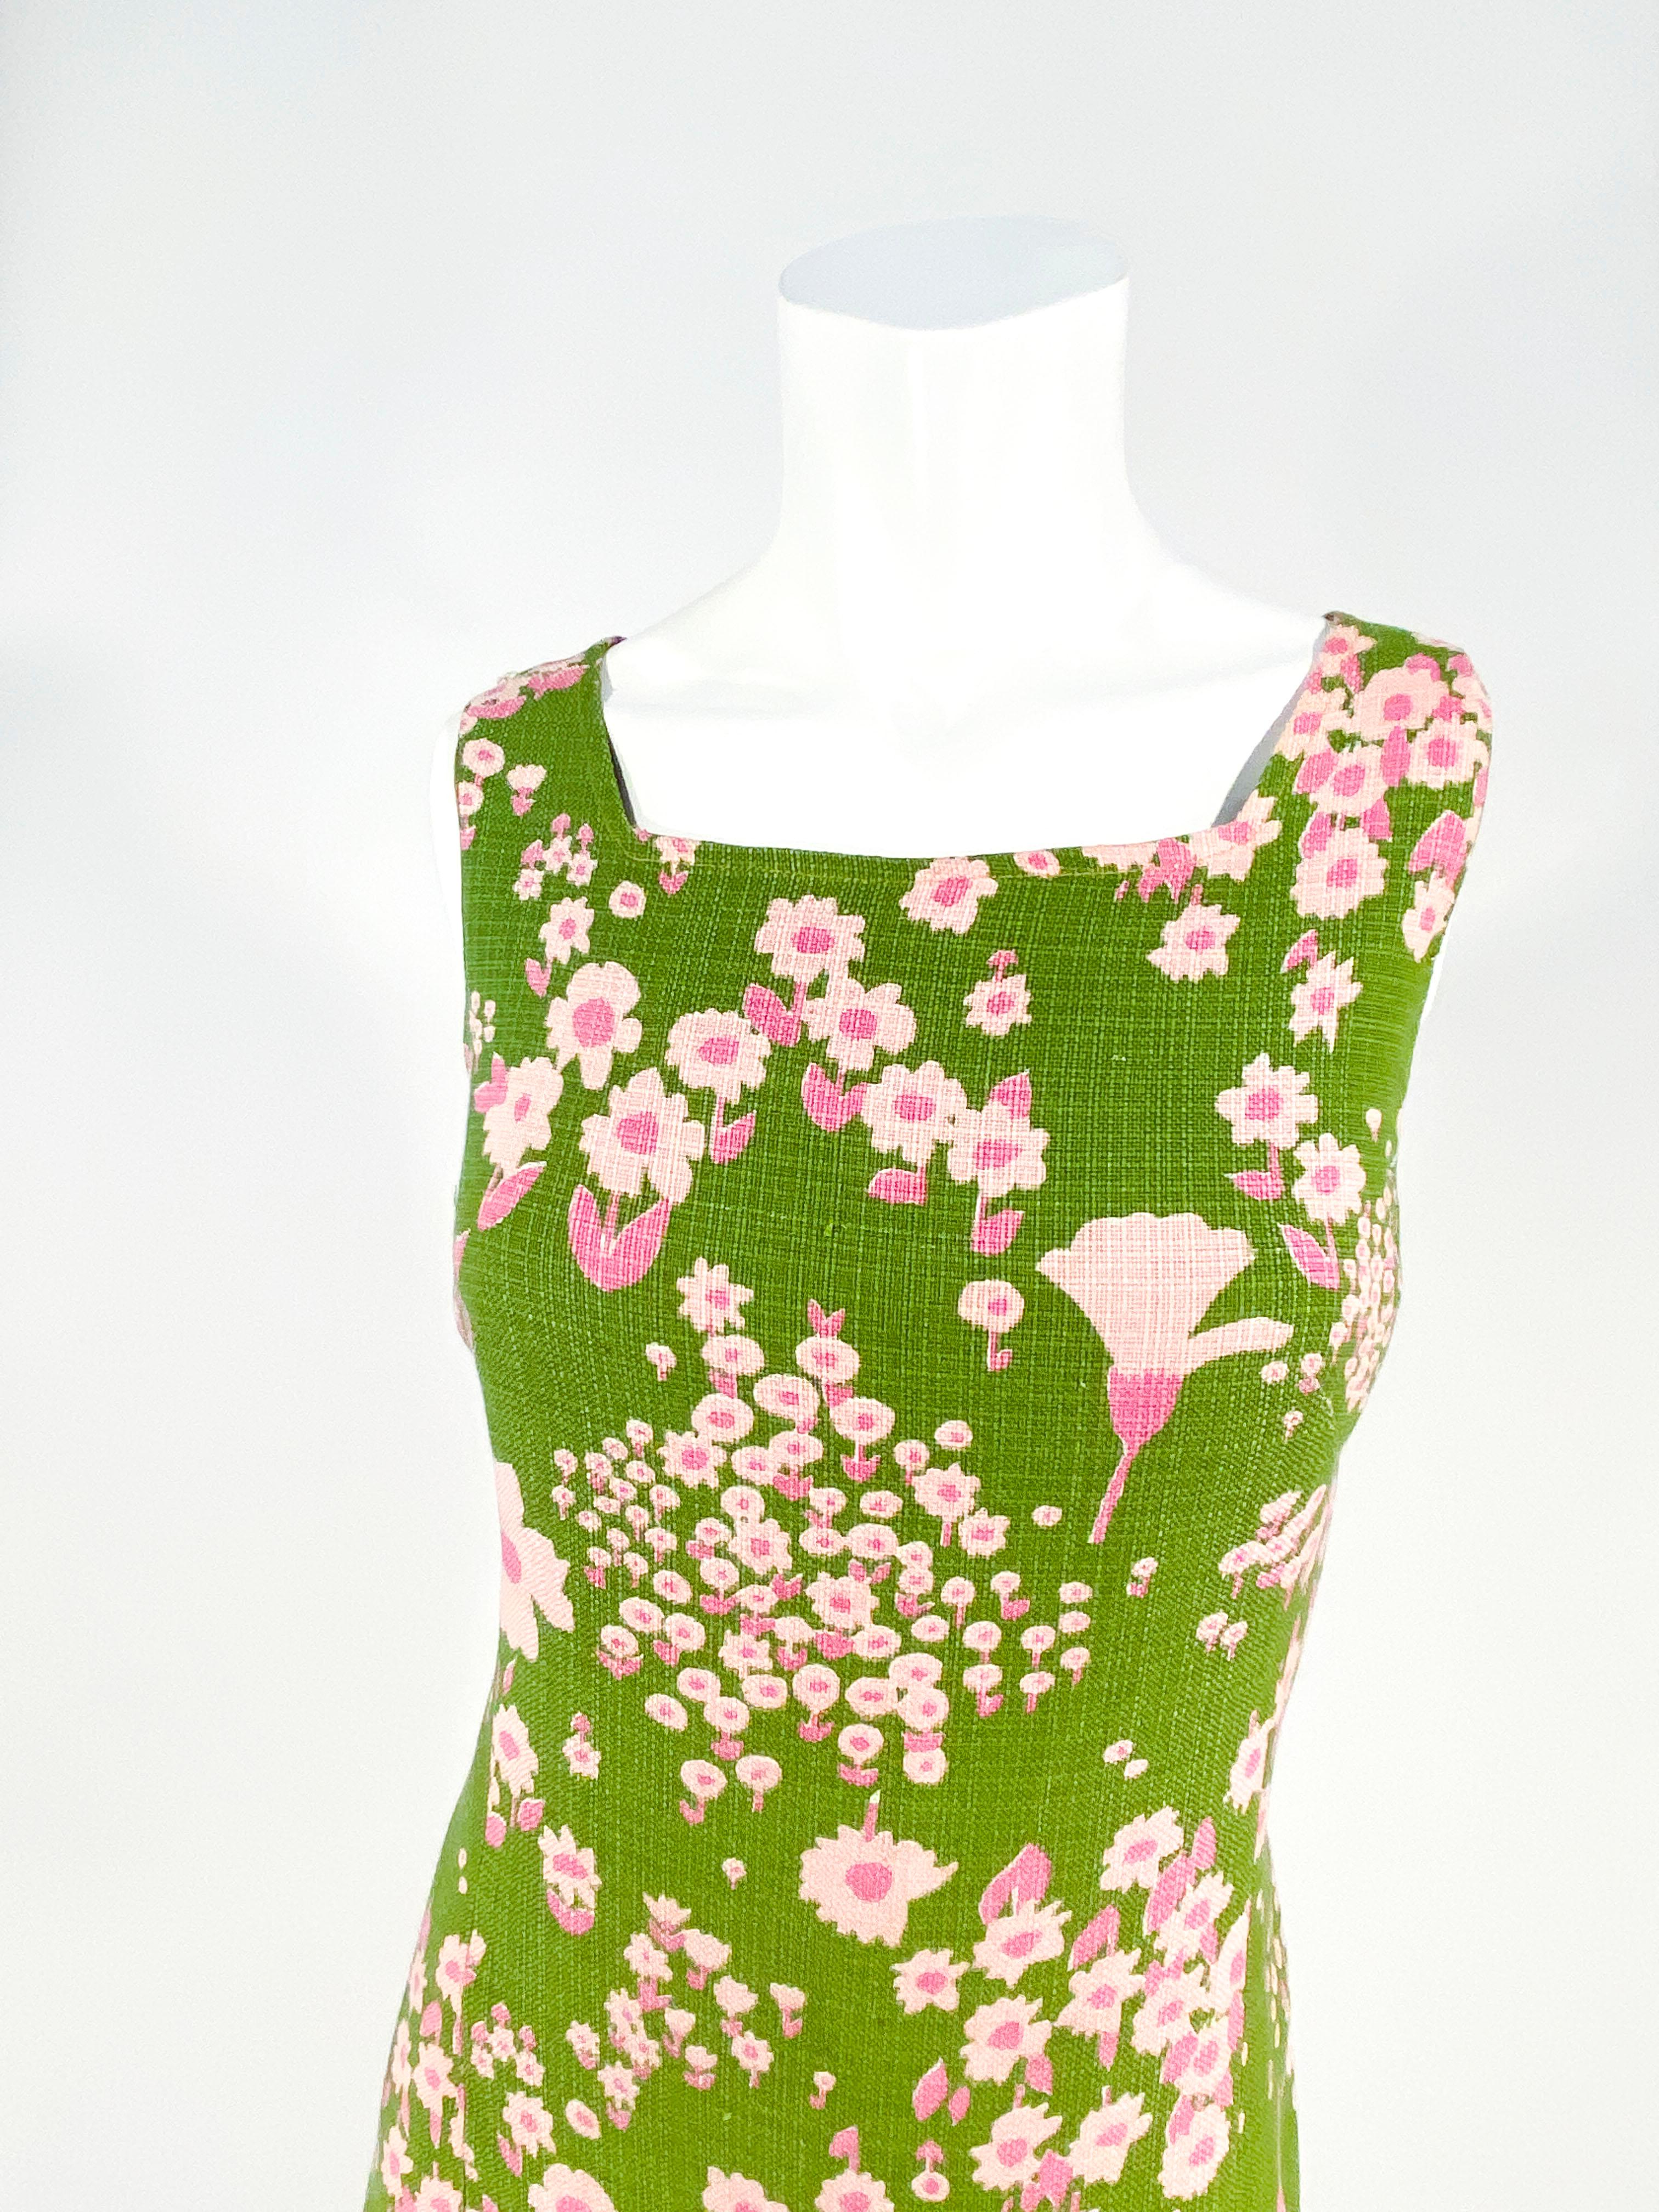 1960s avocado green cotton-linen blend day dress featuring a floral print in two shades of pink. The skirt of the dress is full at the drop-waist. This dress is fully lined, sleeveless, and has a metal back zipper. 